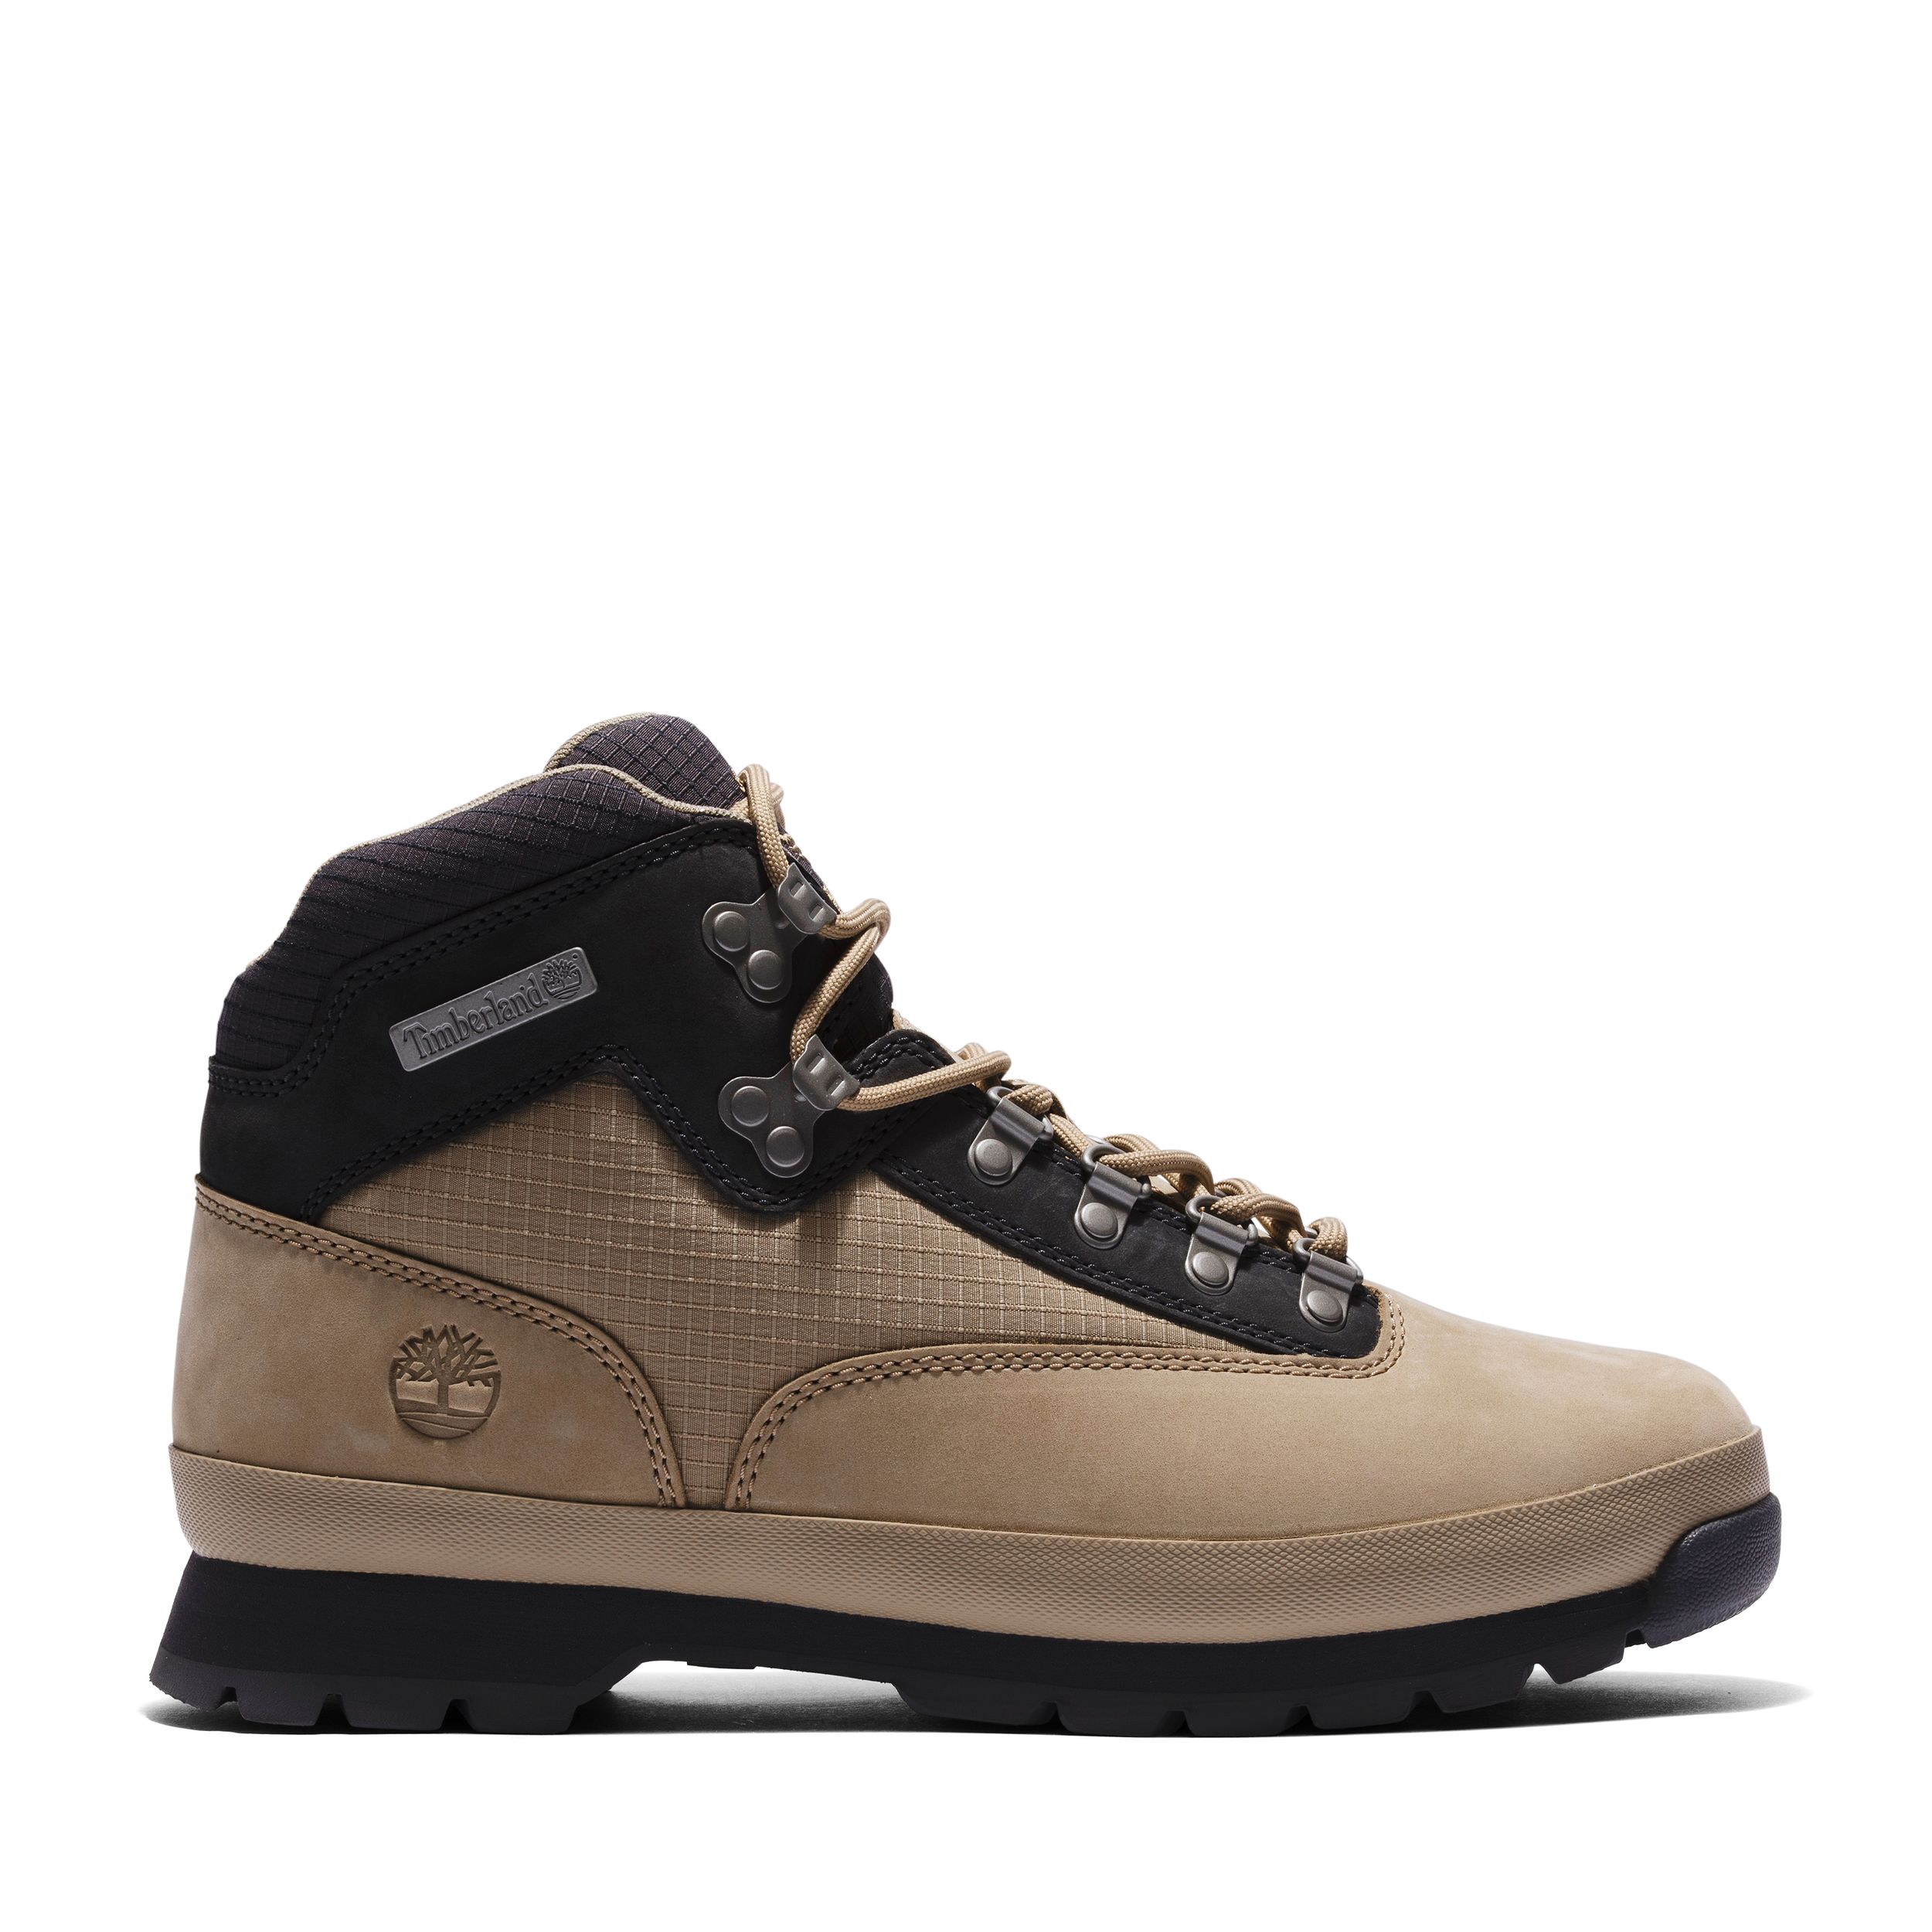 Image of Timberland Men's Euro Hiker Boots